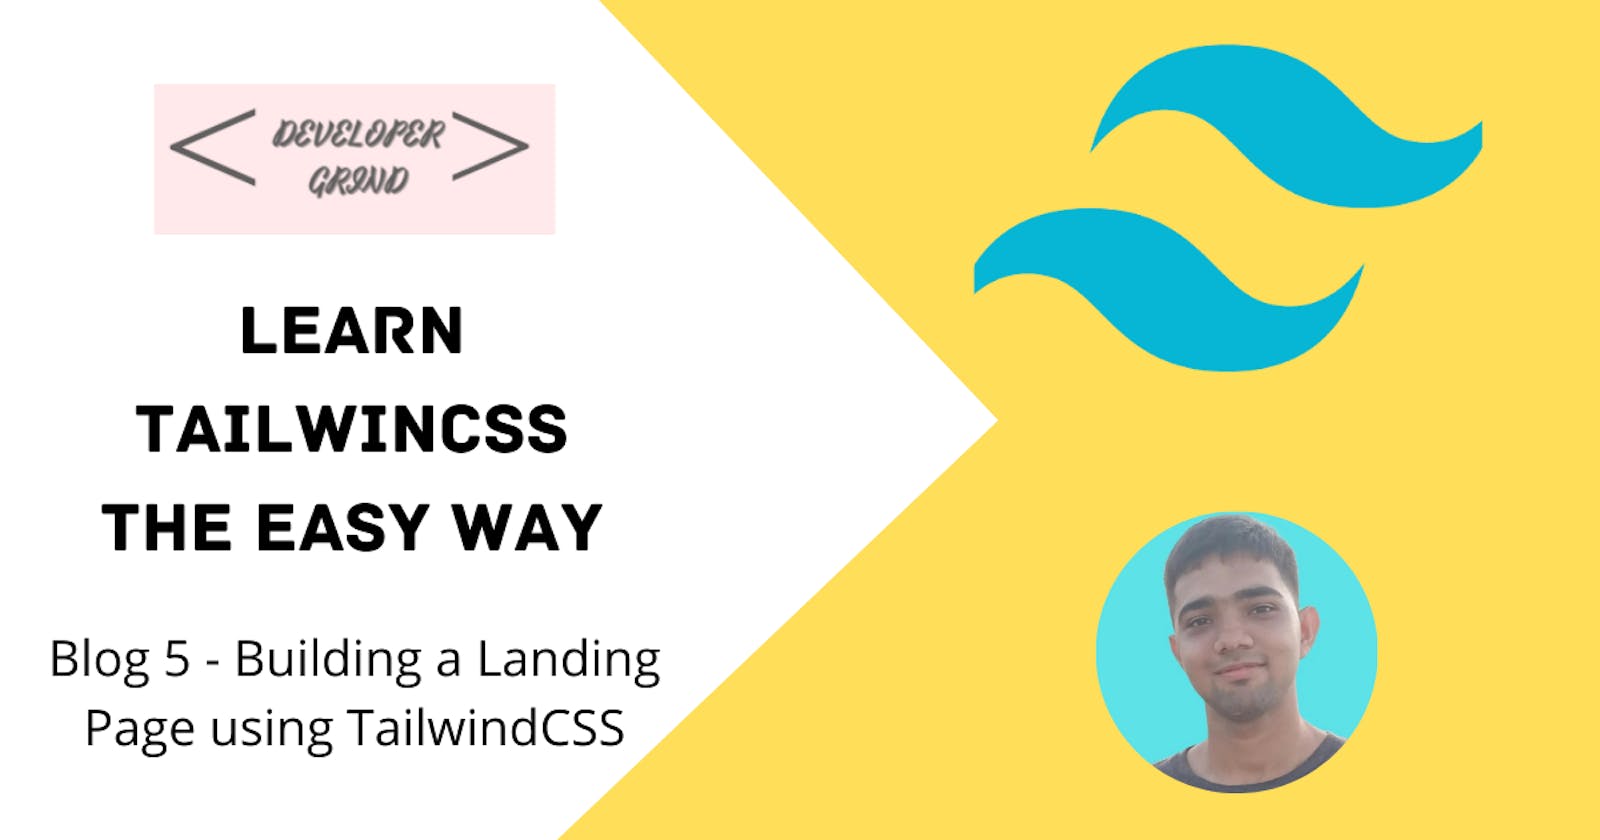 Building a Landing Page using TailwindCSS